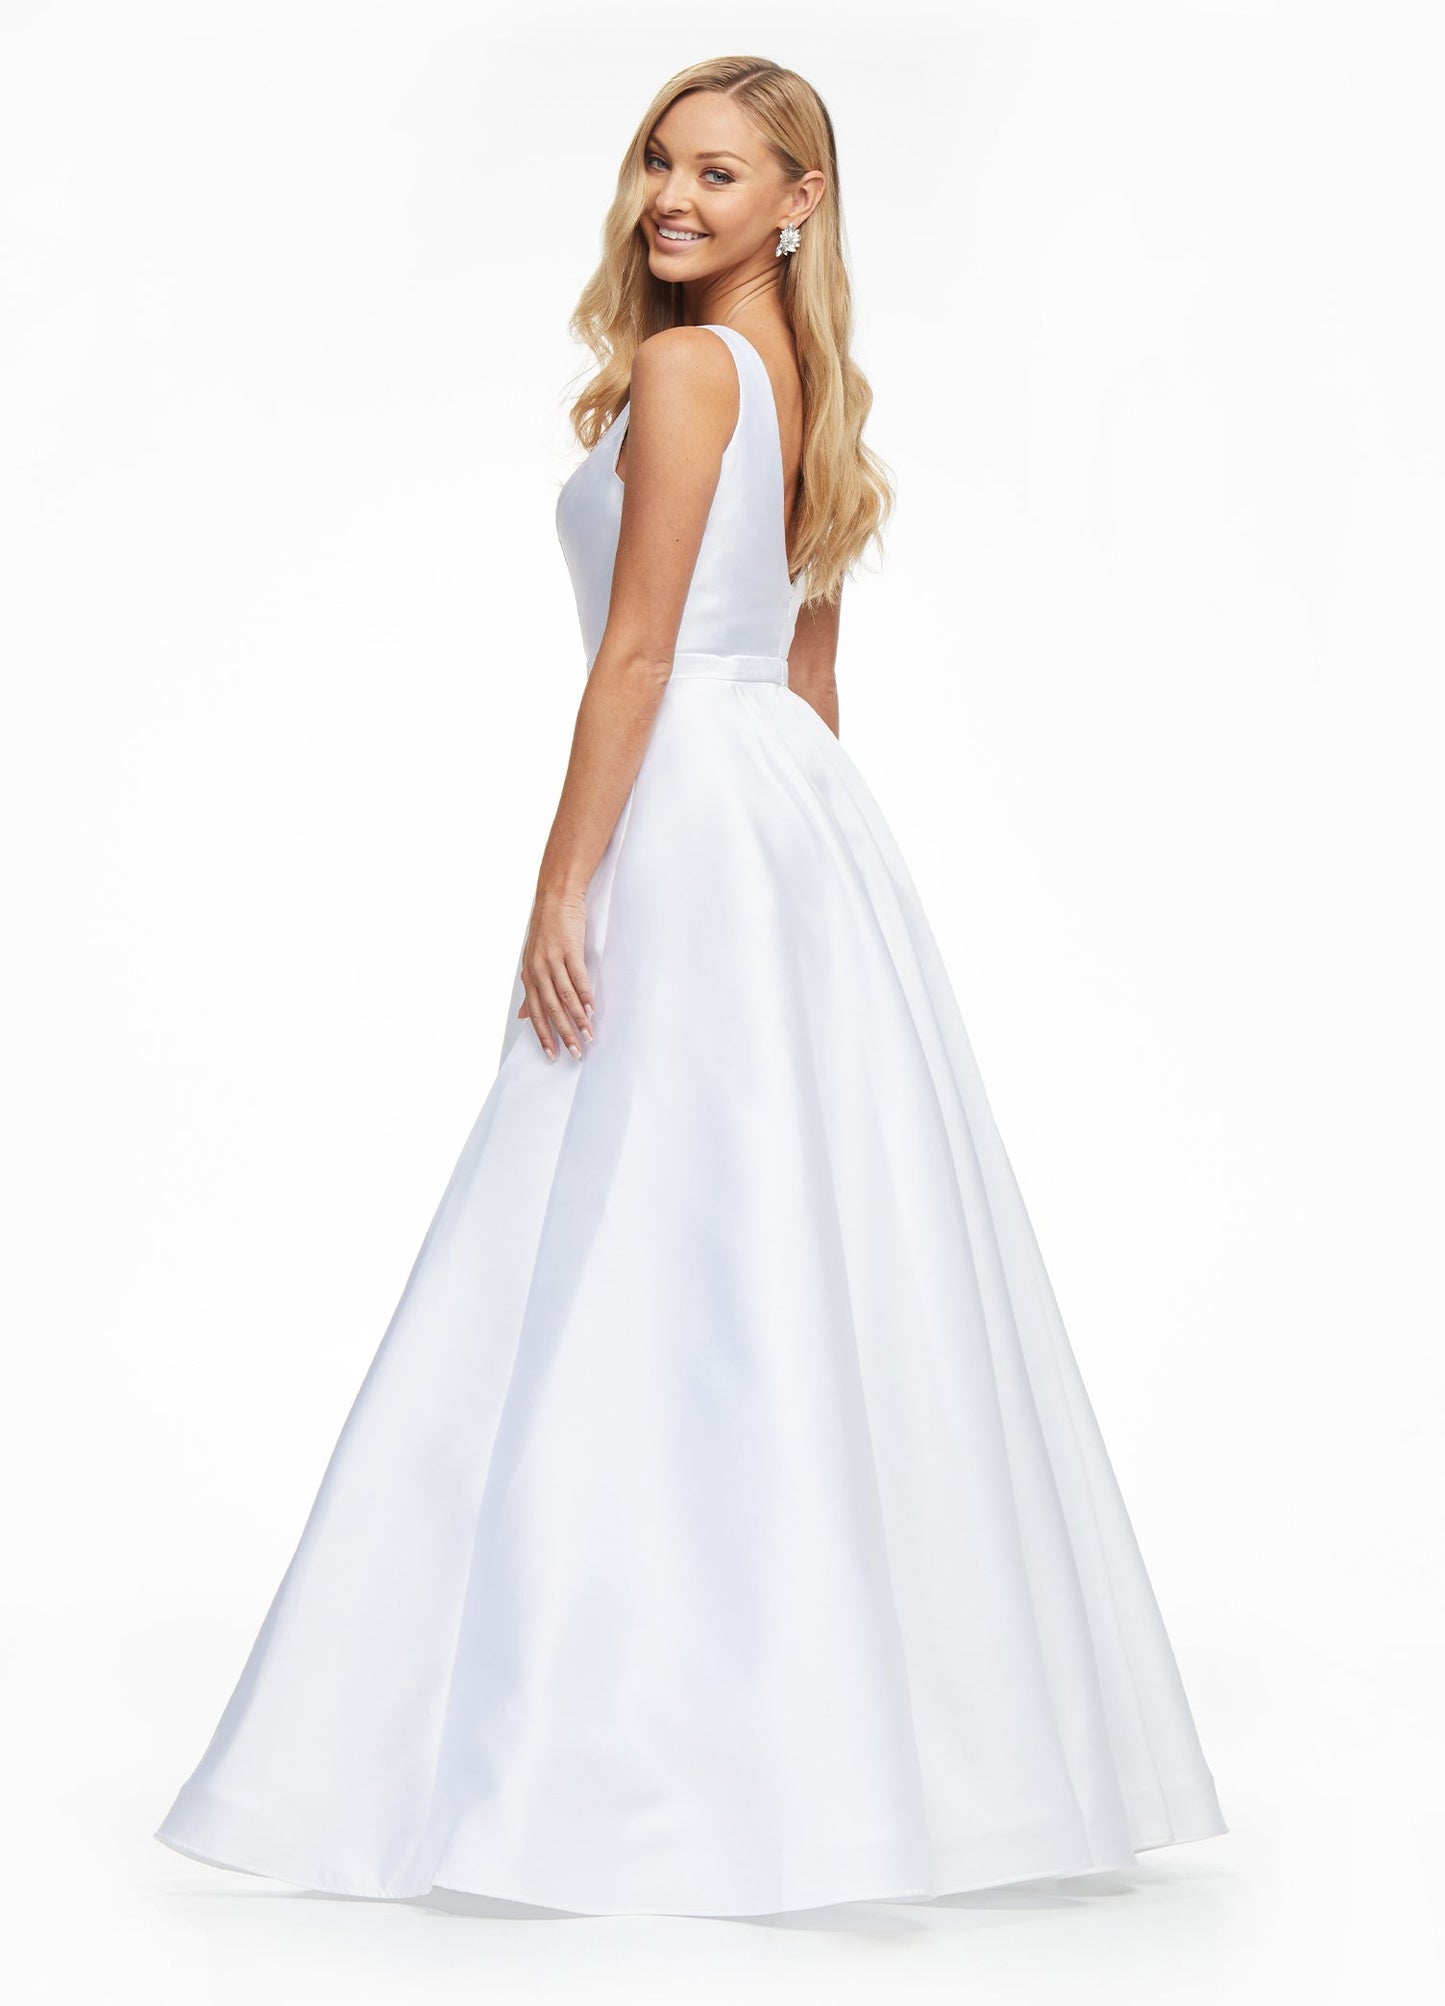 Ashley-Lauren-11094-white-prom-dress-back-a-line-mikado-satin-v-neckline-v-backAshley Lauren 11094 White Prom Dress.  This is a lovely A line prom, pageant and wedding dress made of mikado satin.  It has a v neckline and a v back. Great for your destination wedding or pageant.  Color:  White  Sizes:  12